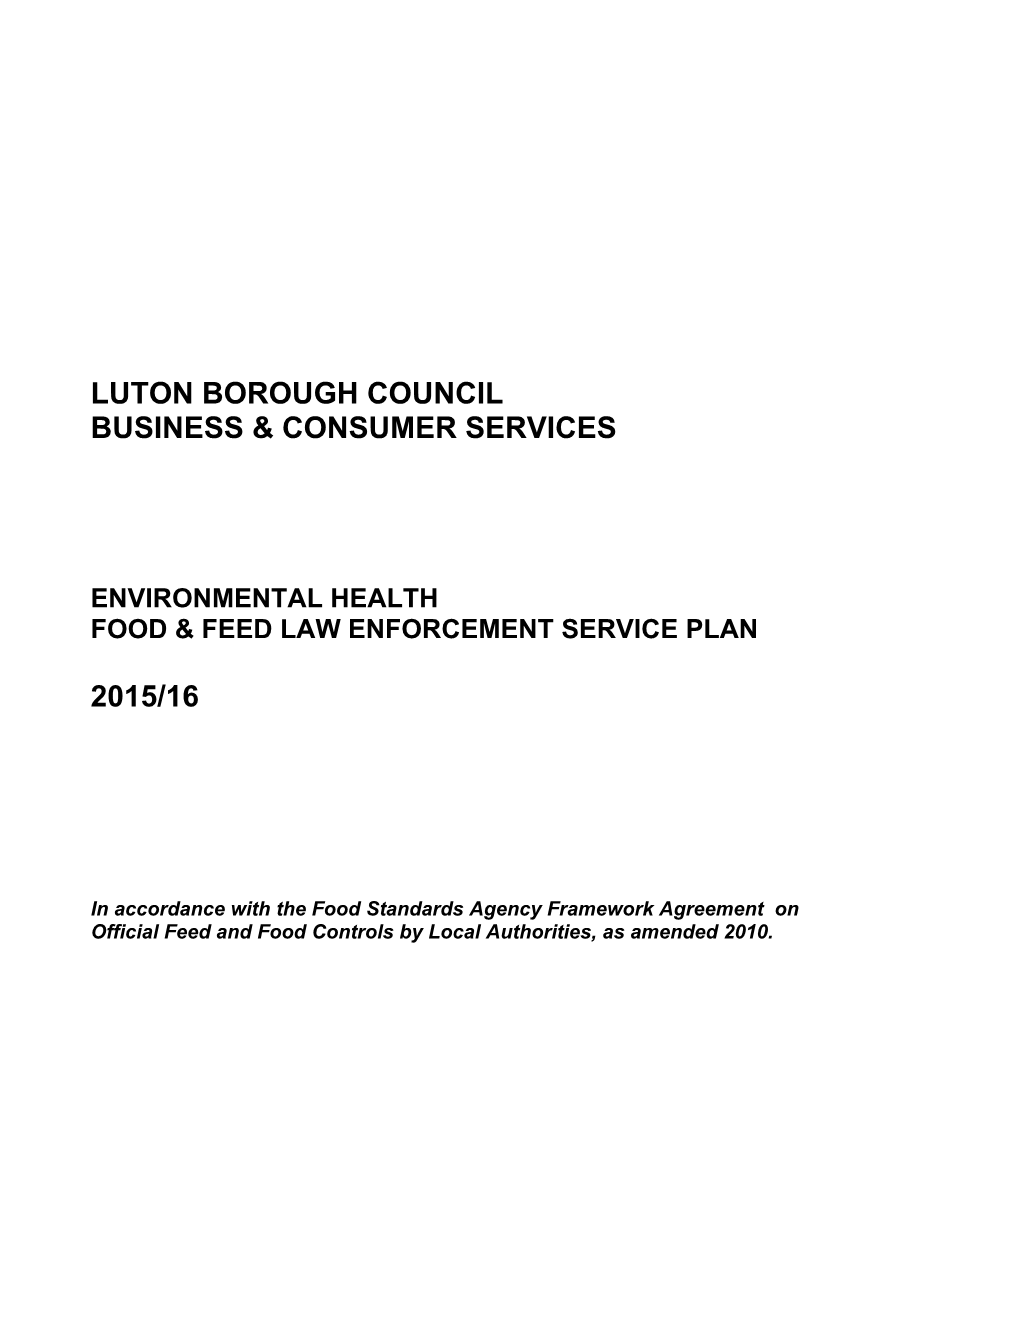 Food and Feed Law Enforcement Service Plan